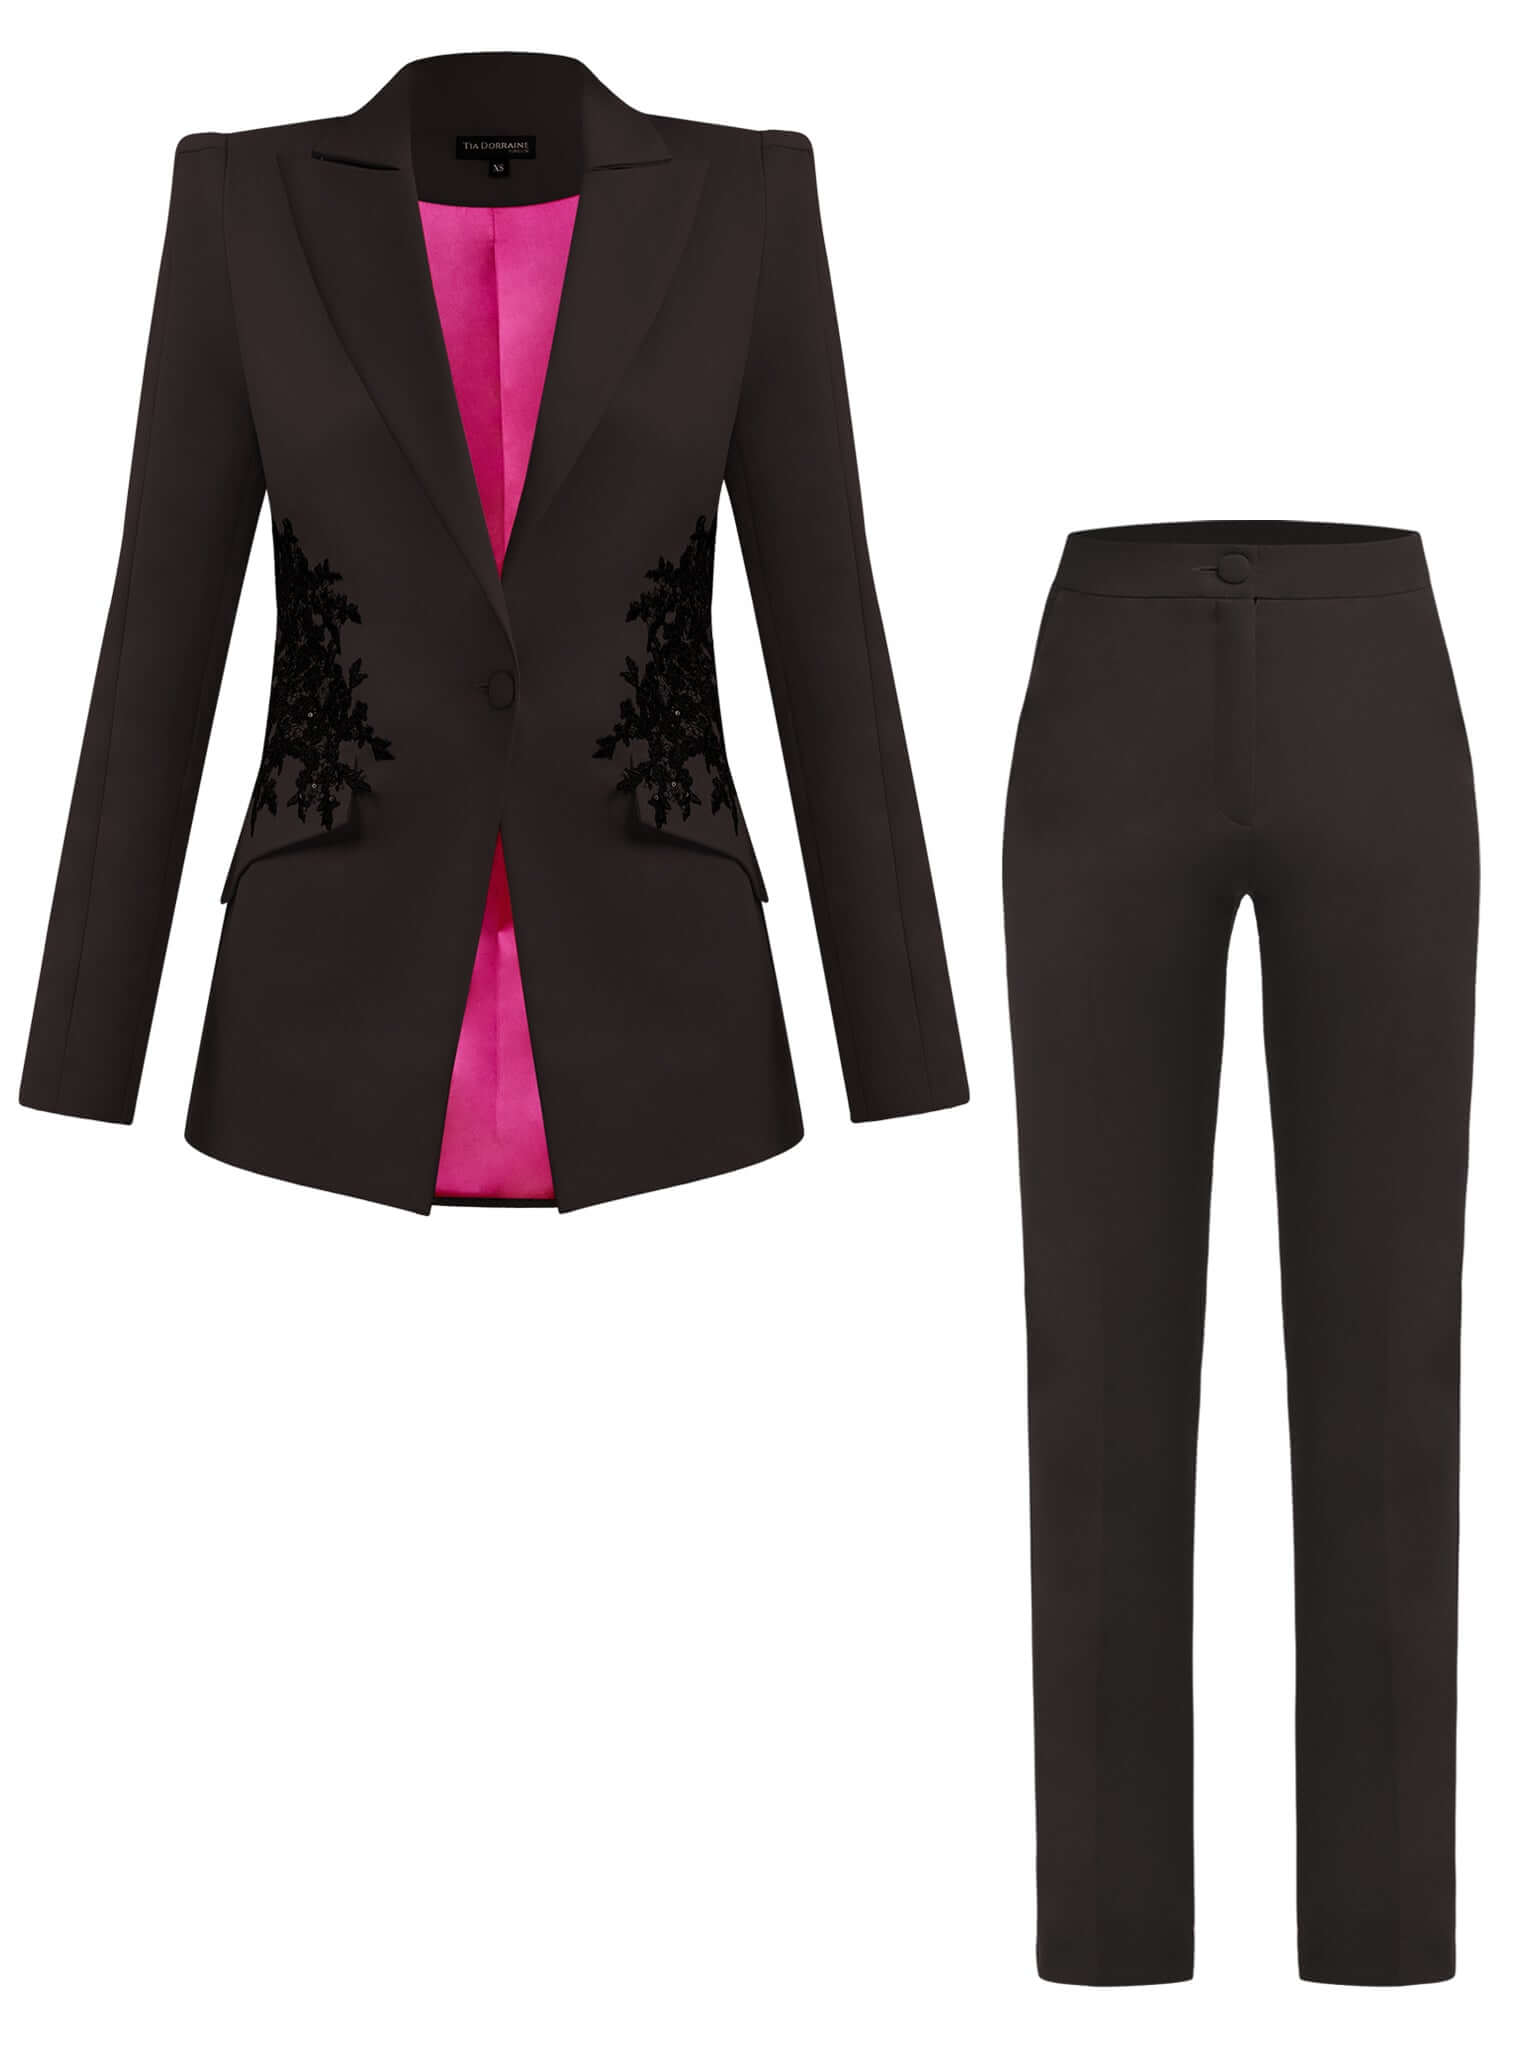 Tia Dorraine Fantasy Tailored Suit With Embroidery - Black